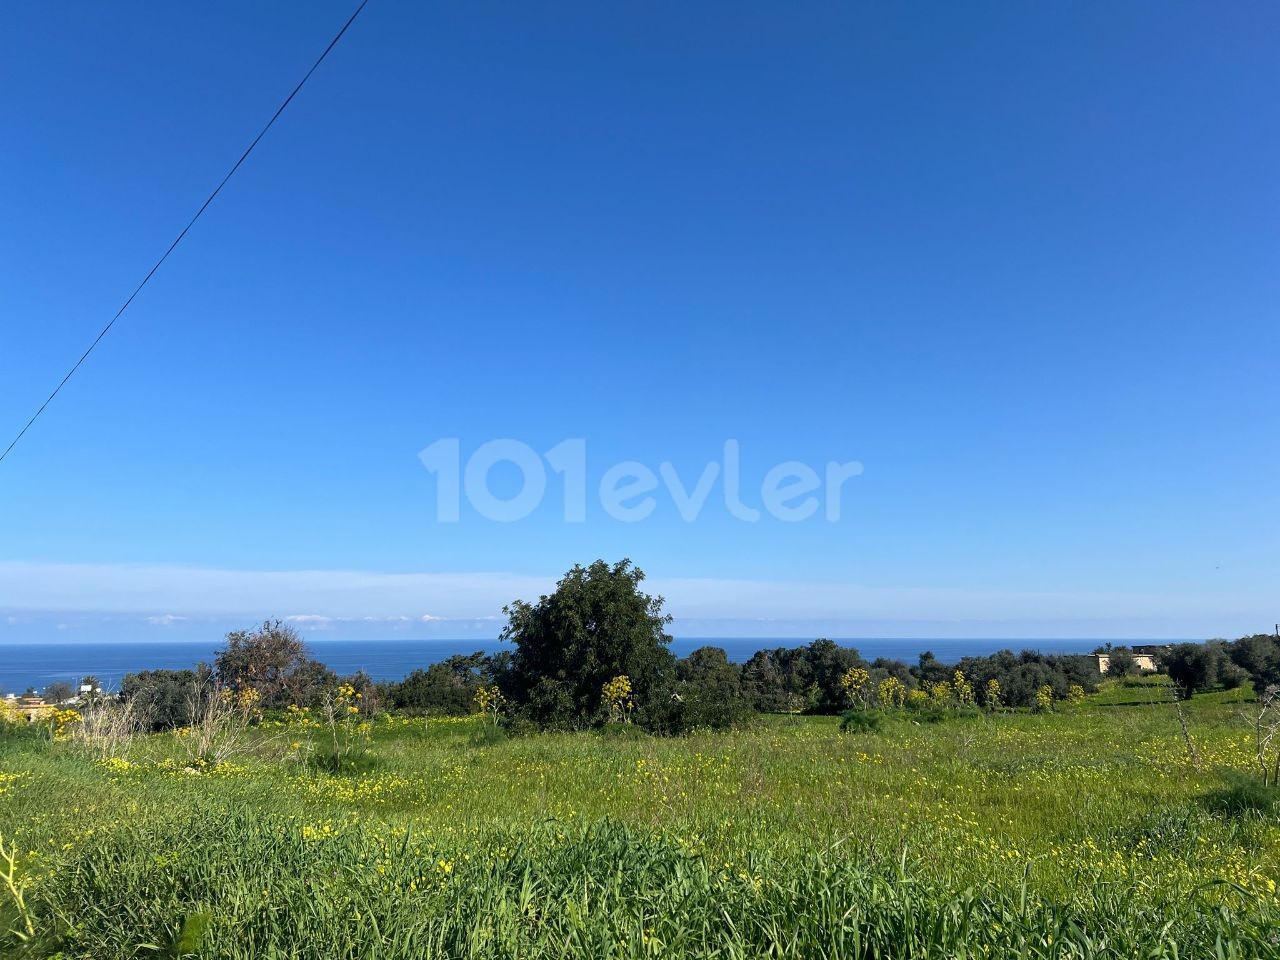 8 DECLARES OF LAND FOR SALE IN İSKELE-SİPAHI